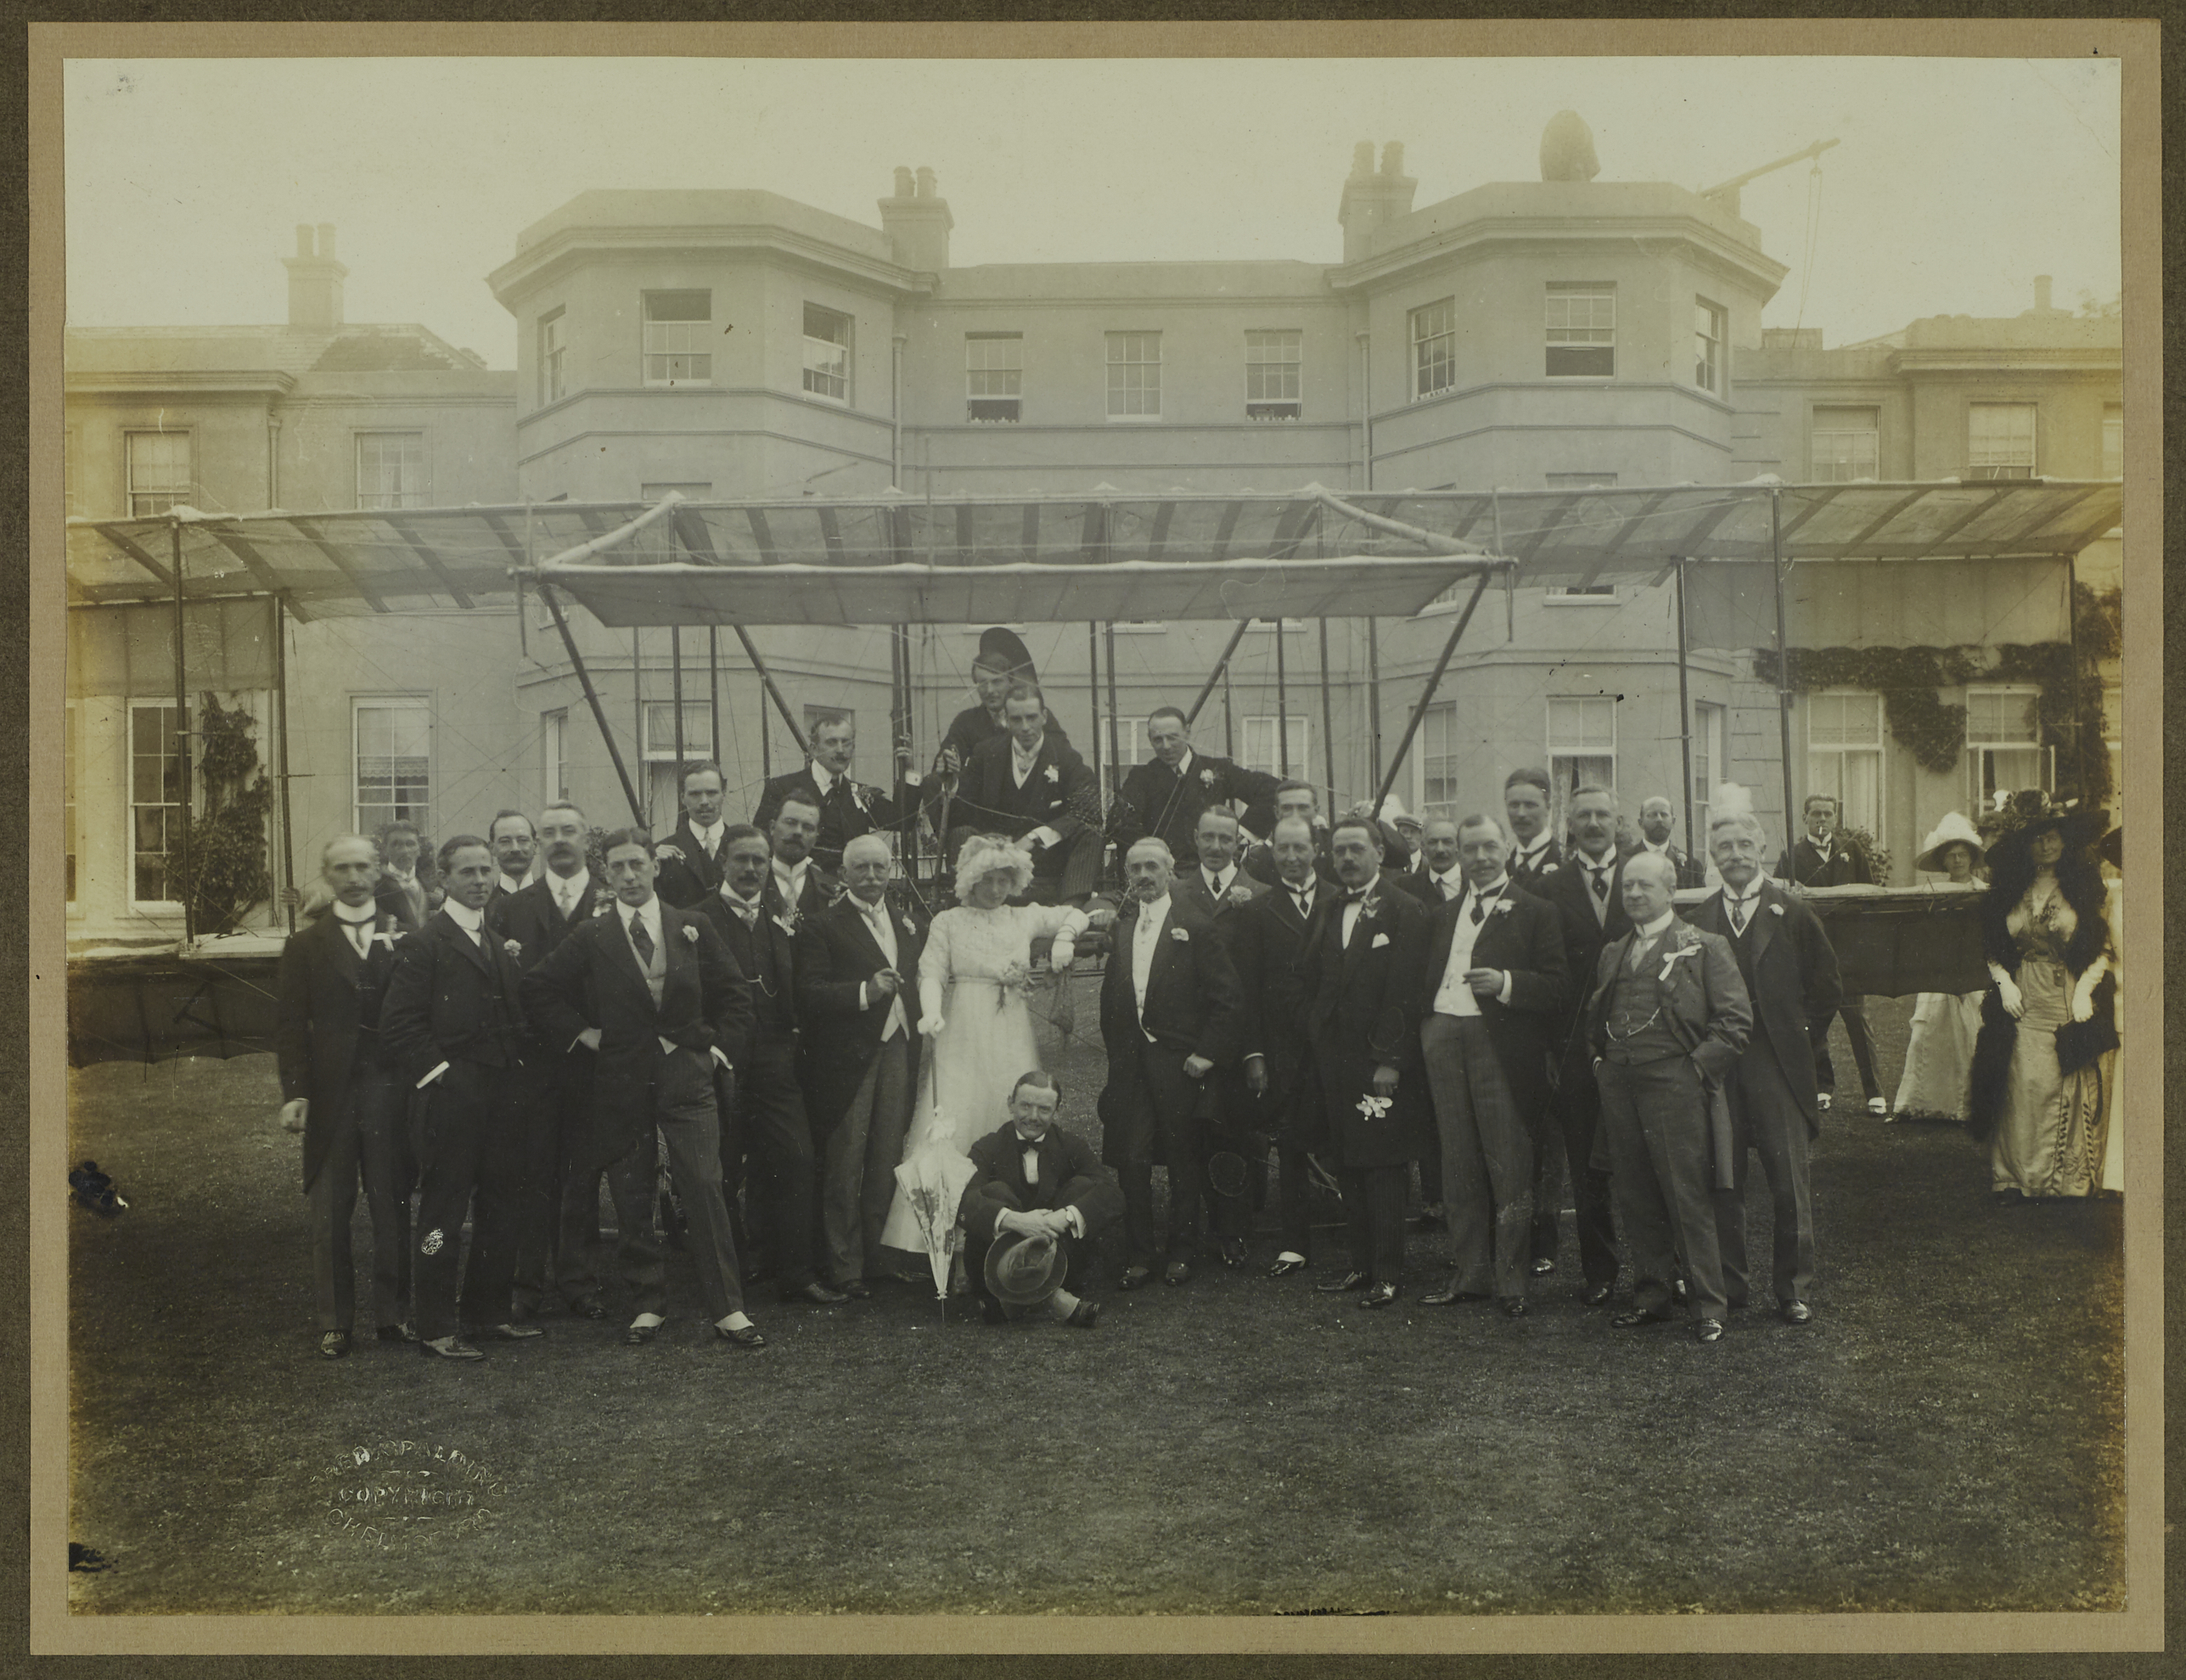 Black and white photograph of wedding party (mainly men with some women nearly out of shot) posing with a biplane in front of Hylands House. Groom and several men on the biplane wing. Bride standing in front of the biplane in white wedding dress